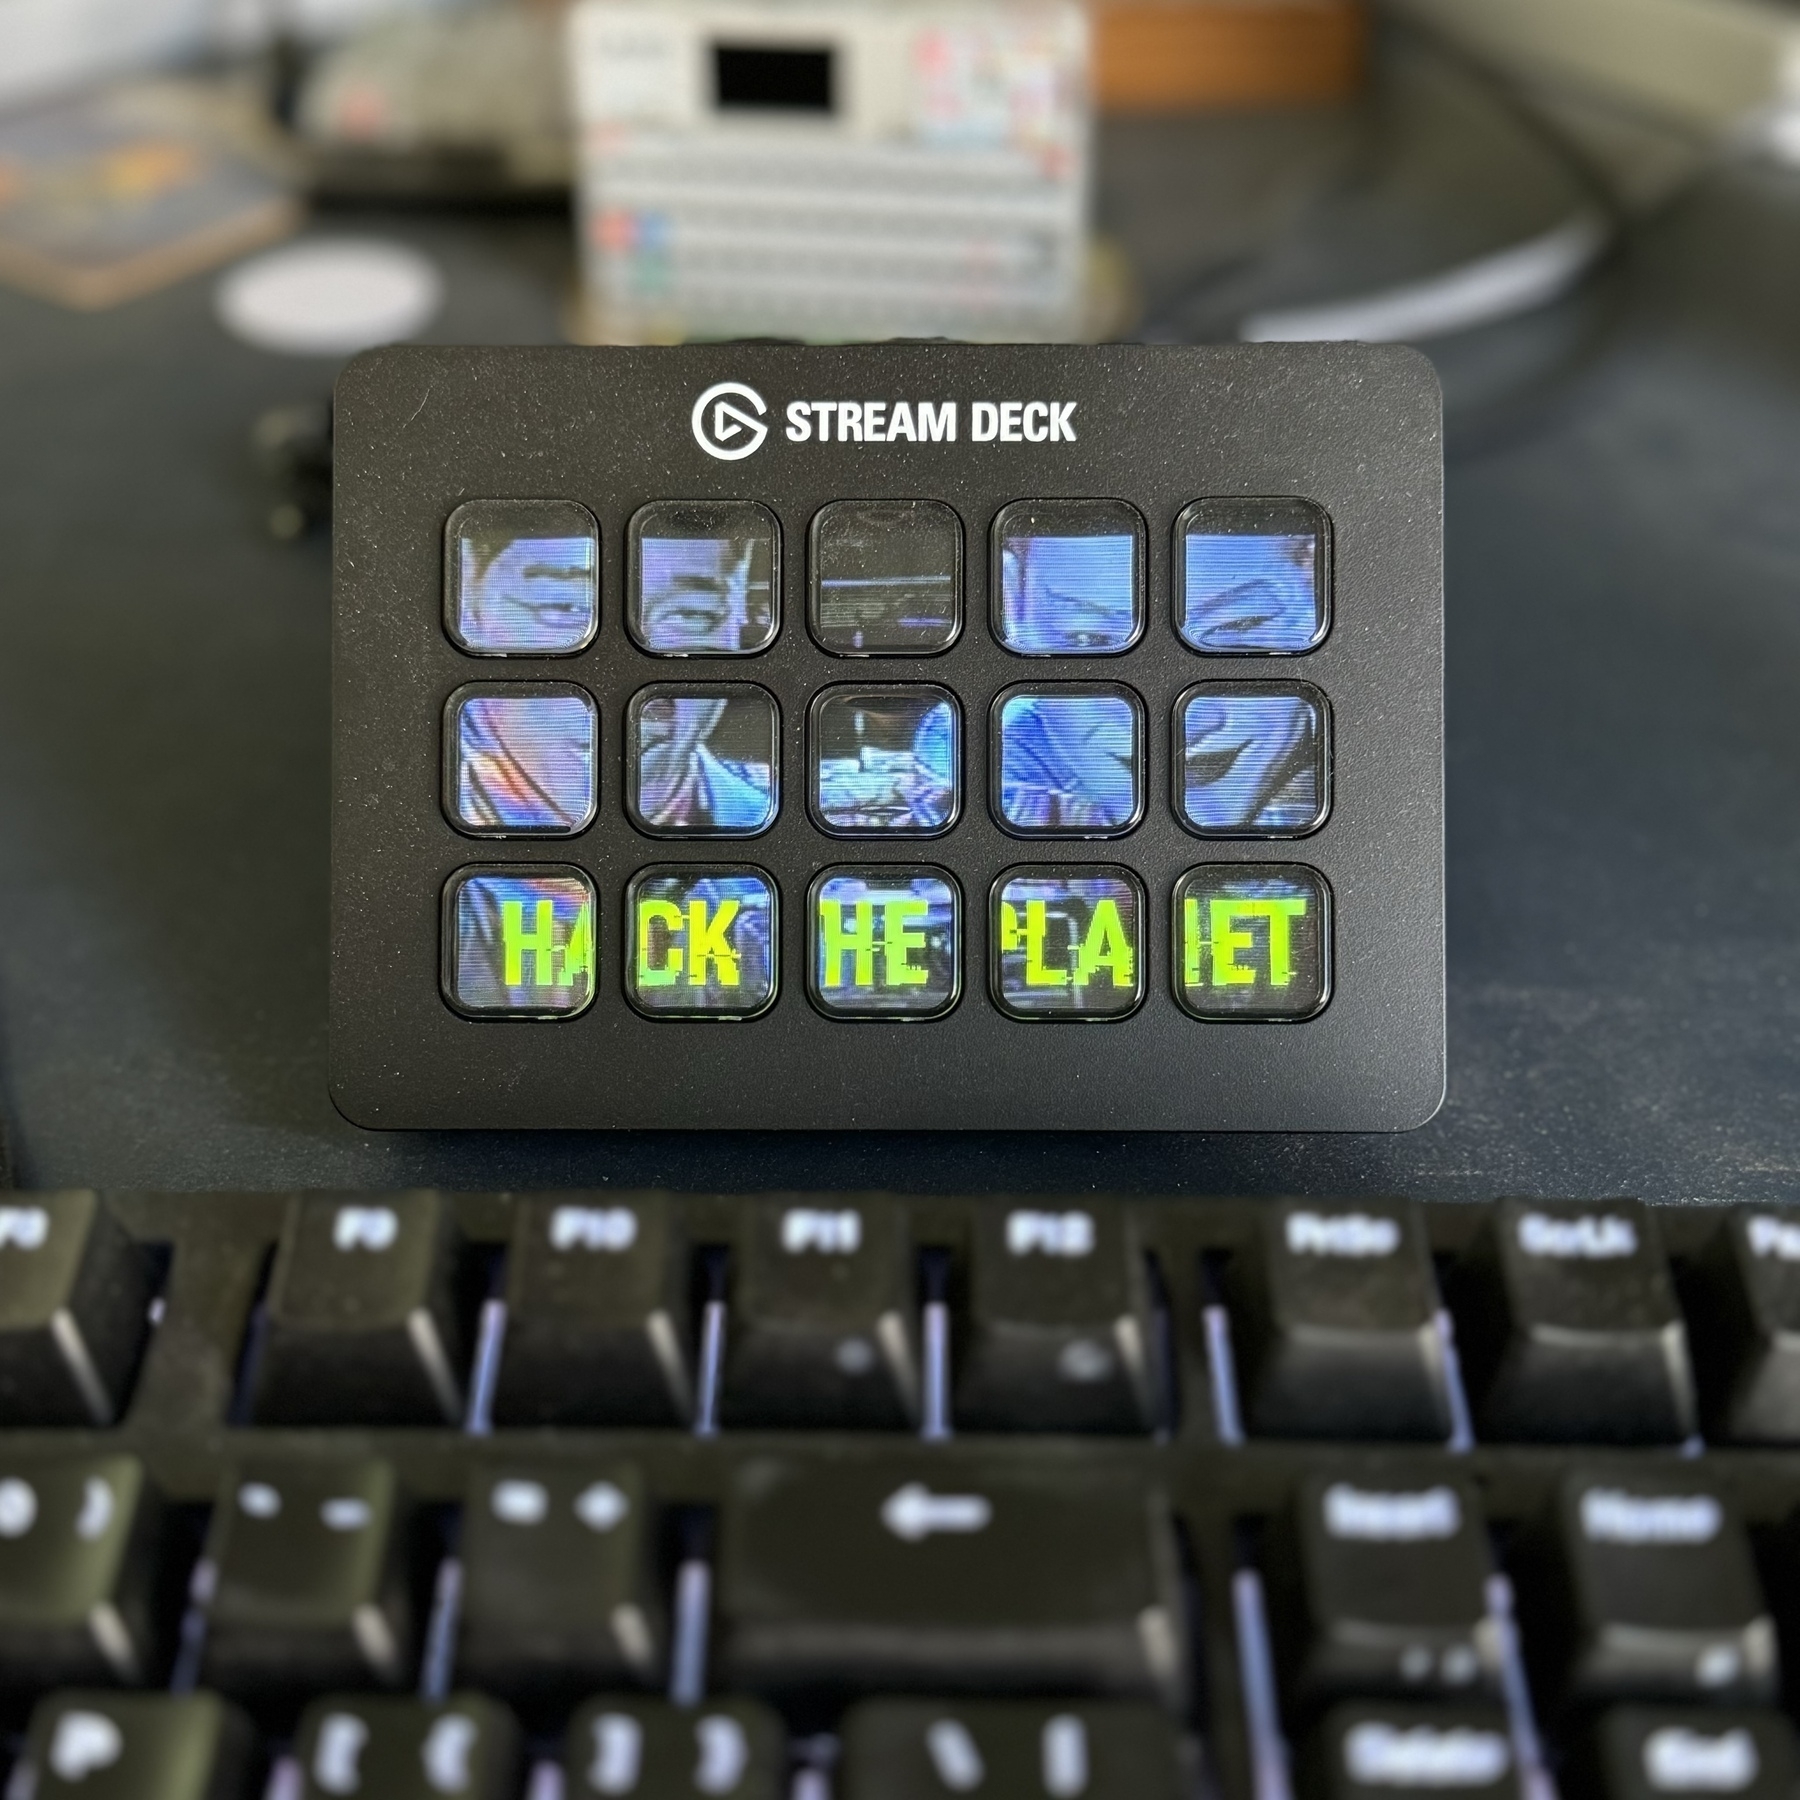 The Stream Deck sitting on my desk has a background of Razor and Blade from the movie “Hackers”, captioned “HACK THE PLANET”.&10;&10;The dust blowing in today gives the patina of a Cyberpunk 2077 nomad’s table.